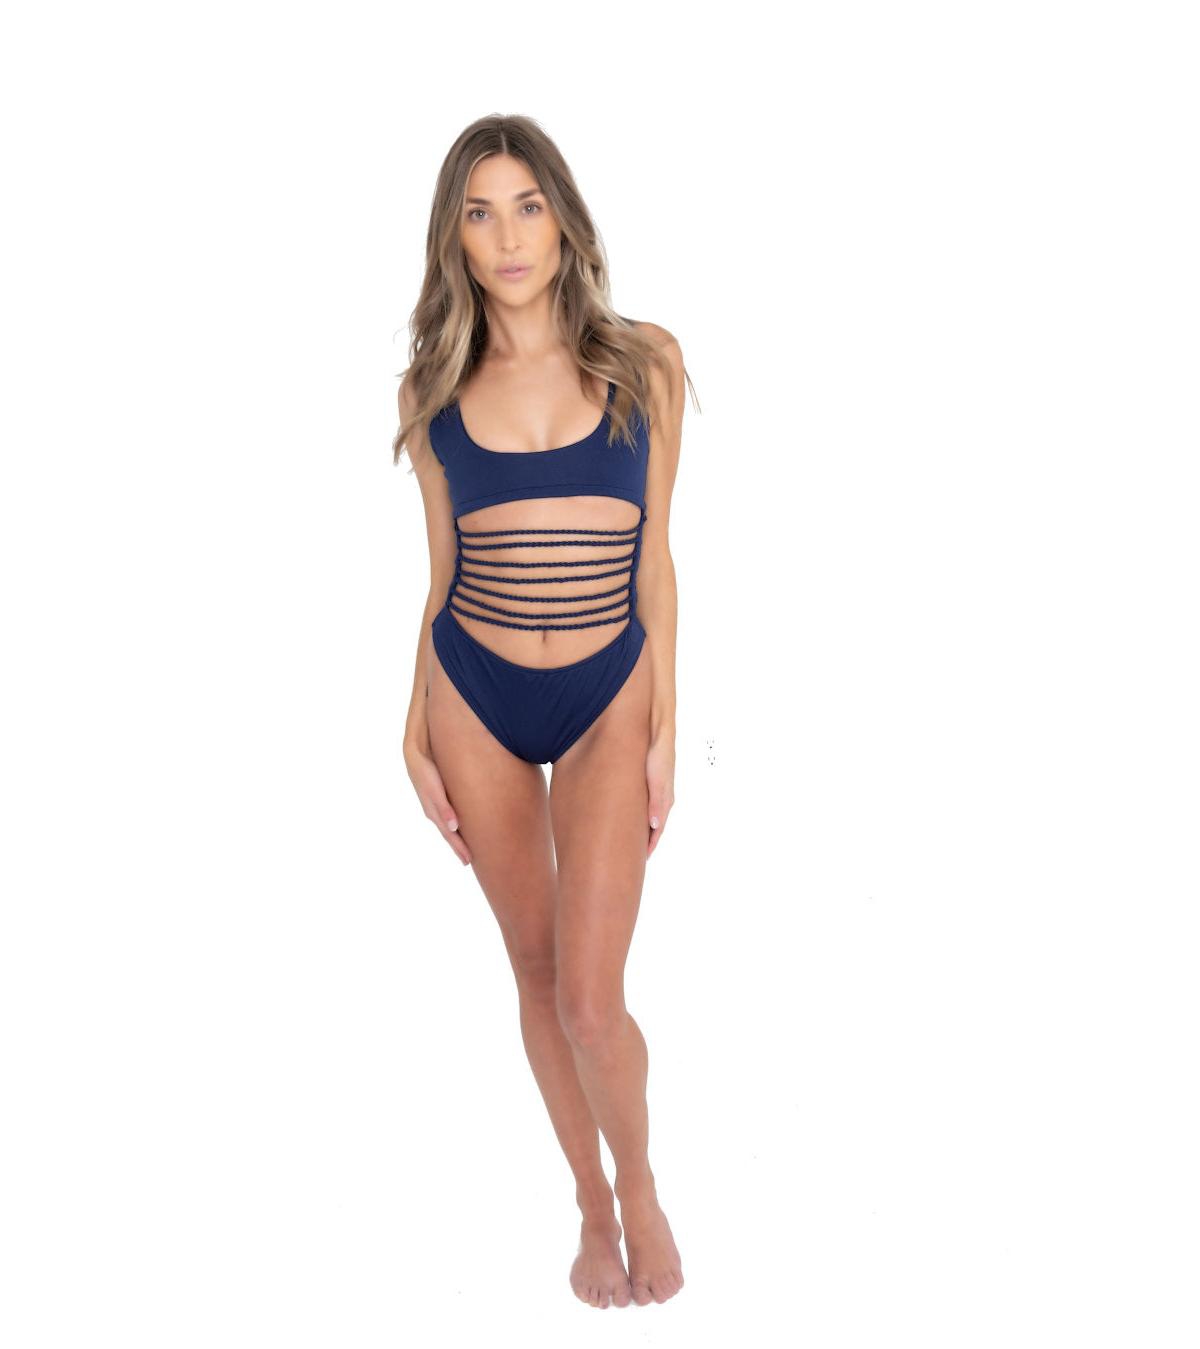 Women's Rope-a-Dope One Piece Swimsuit - Navy blue